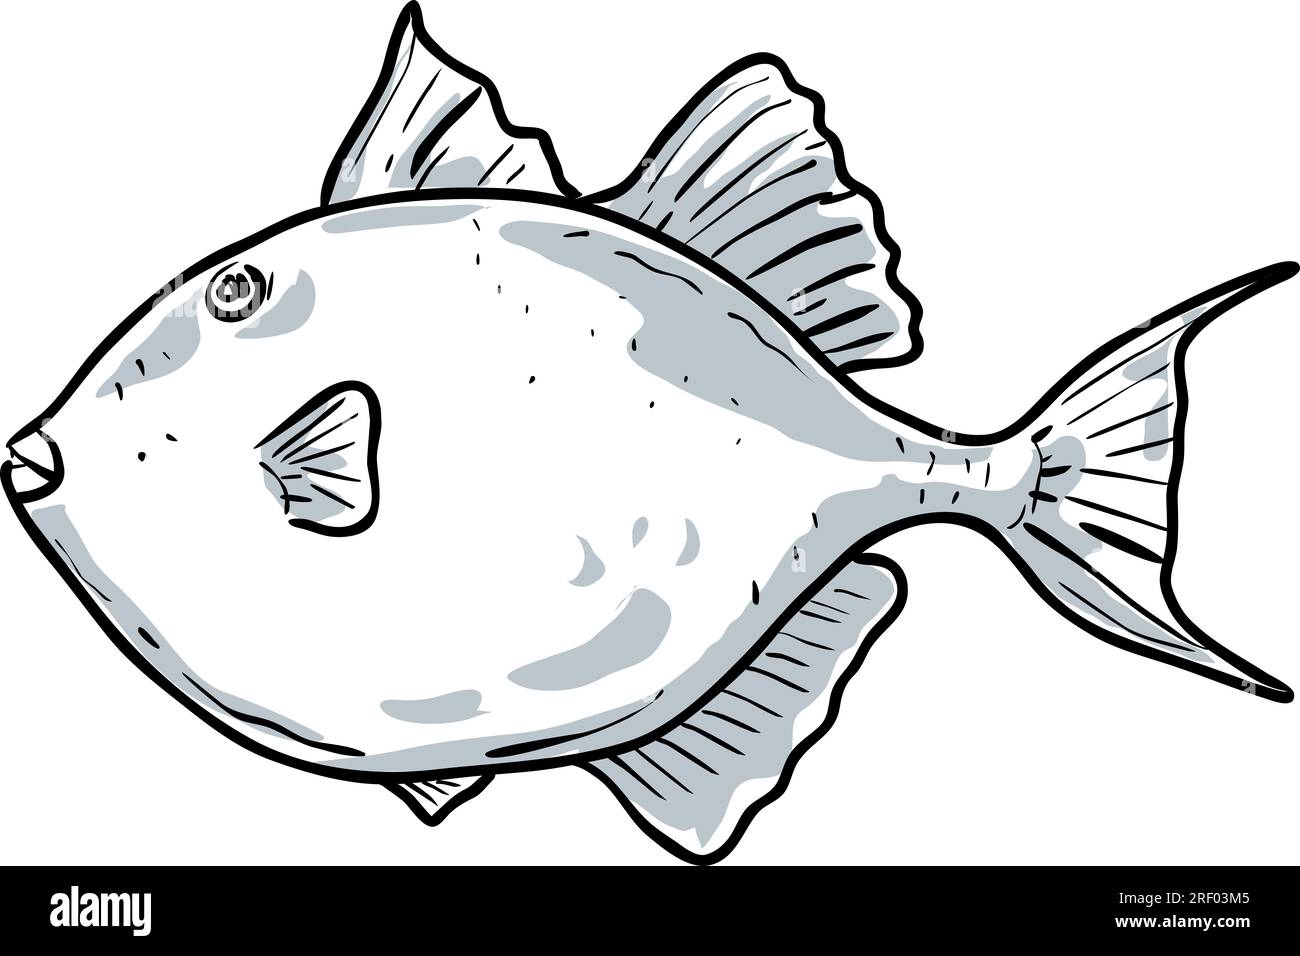 Cartoon style drawing sketch illustration of a Gray Triggerfish, Balistes capriscus, Grey triggerfish, Leatherjacket, Leatherneck, Taly fish of the Gu Stock Photo